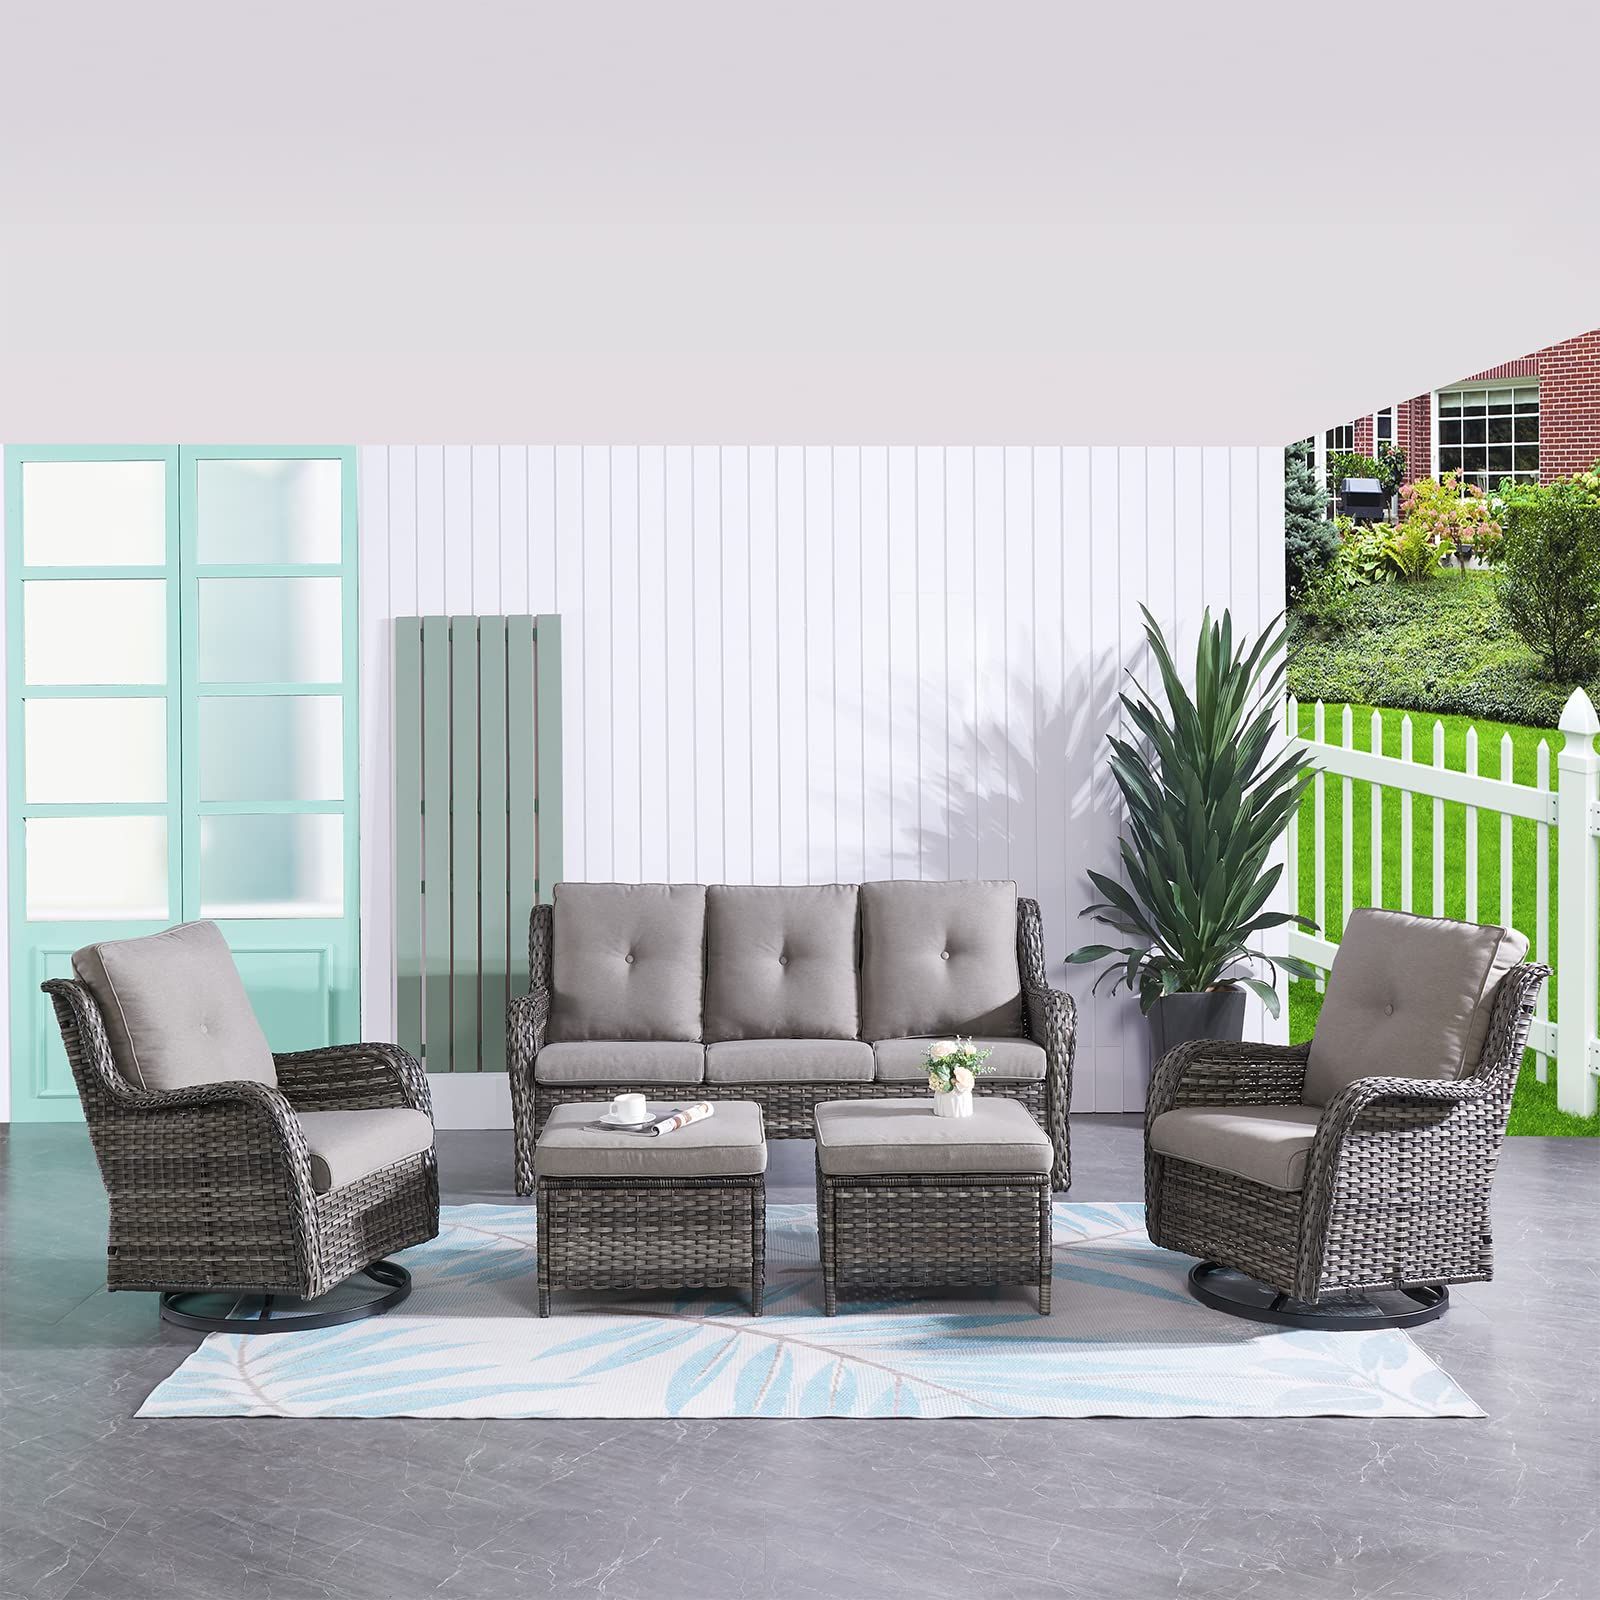 Amazon: Hummuh 5 Pieces Outdoor Furniture Patio Furniture Set Wicker  Outdoor Sectional Sofa With Swivel Rocking Chairs,patio Ottomans : Patio,  Lawn & Garden In Well Liked Rocking Chairs Wicker Patio Furniture Set (View 2 of 15)